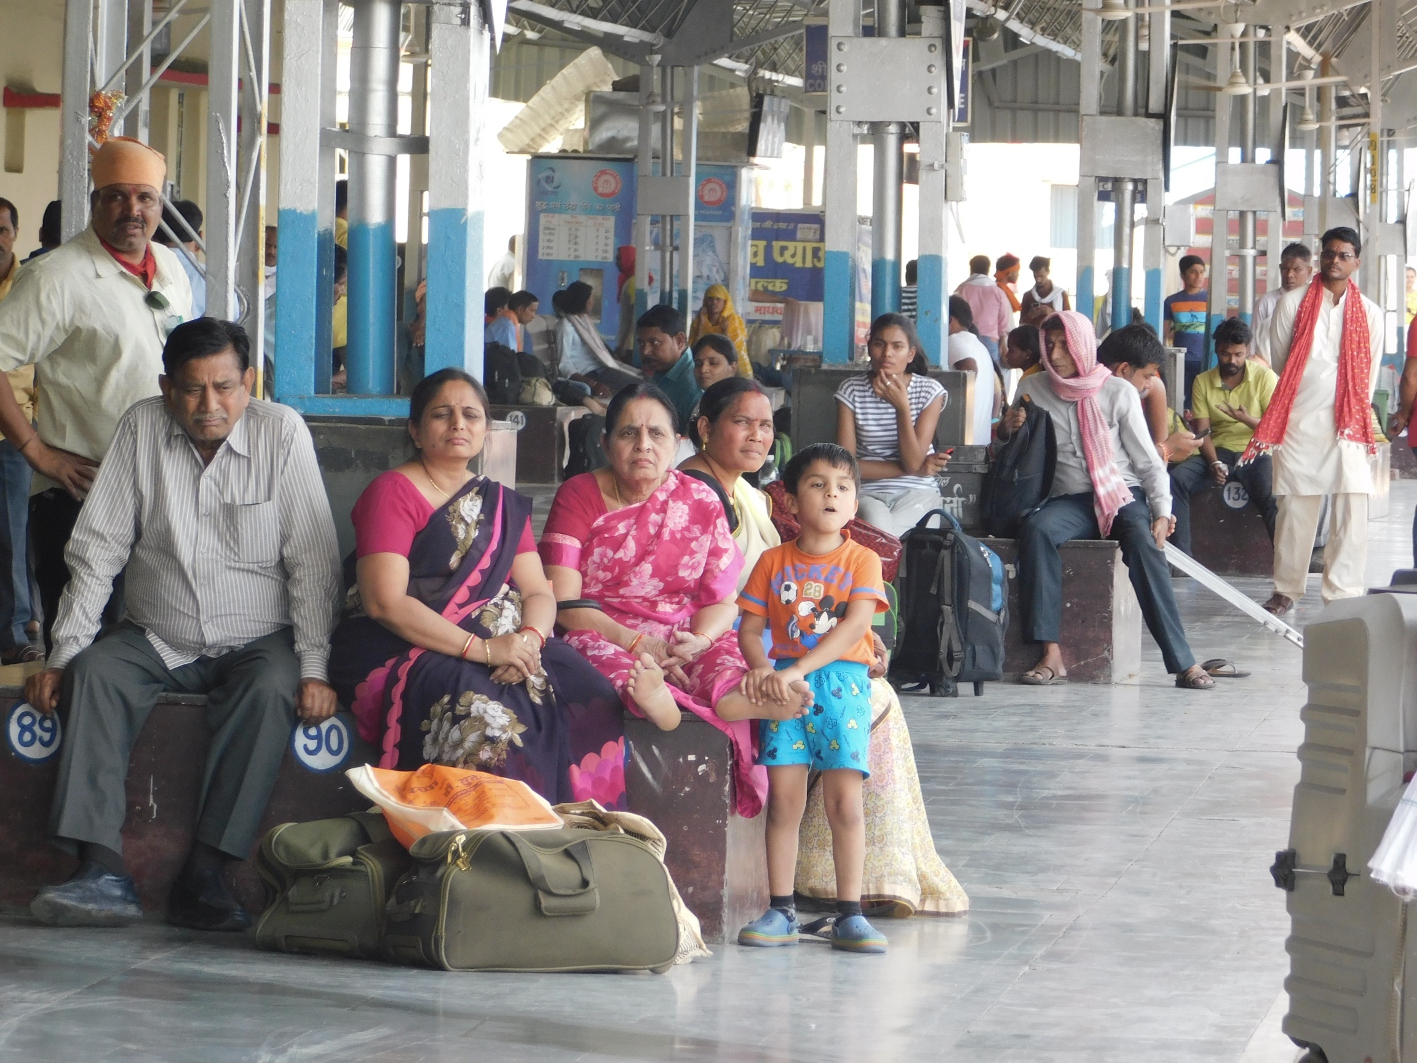 Three trains in several stations due to mega block